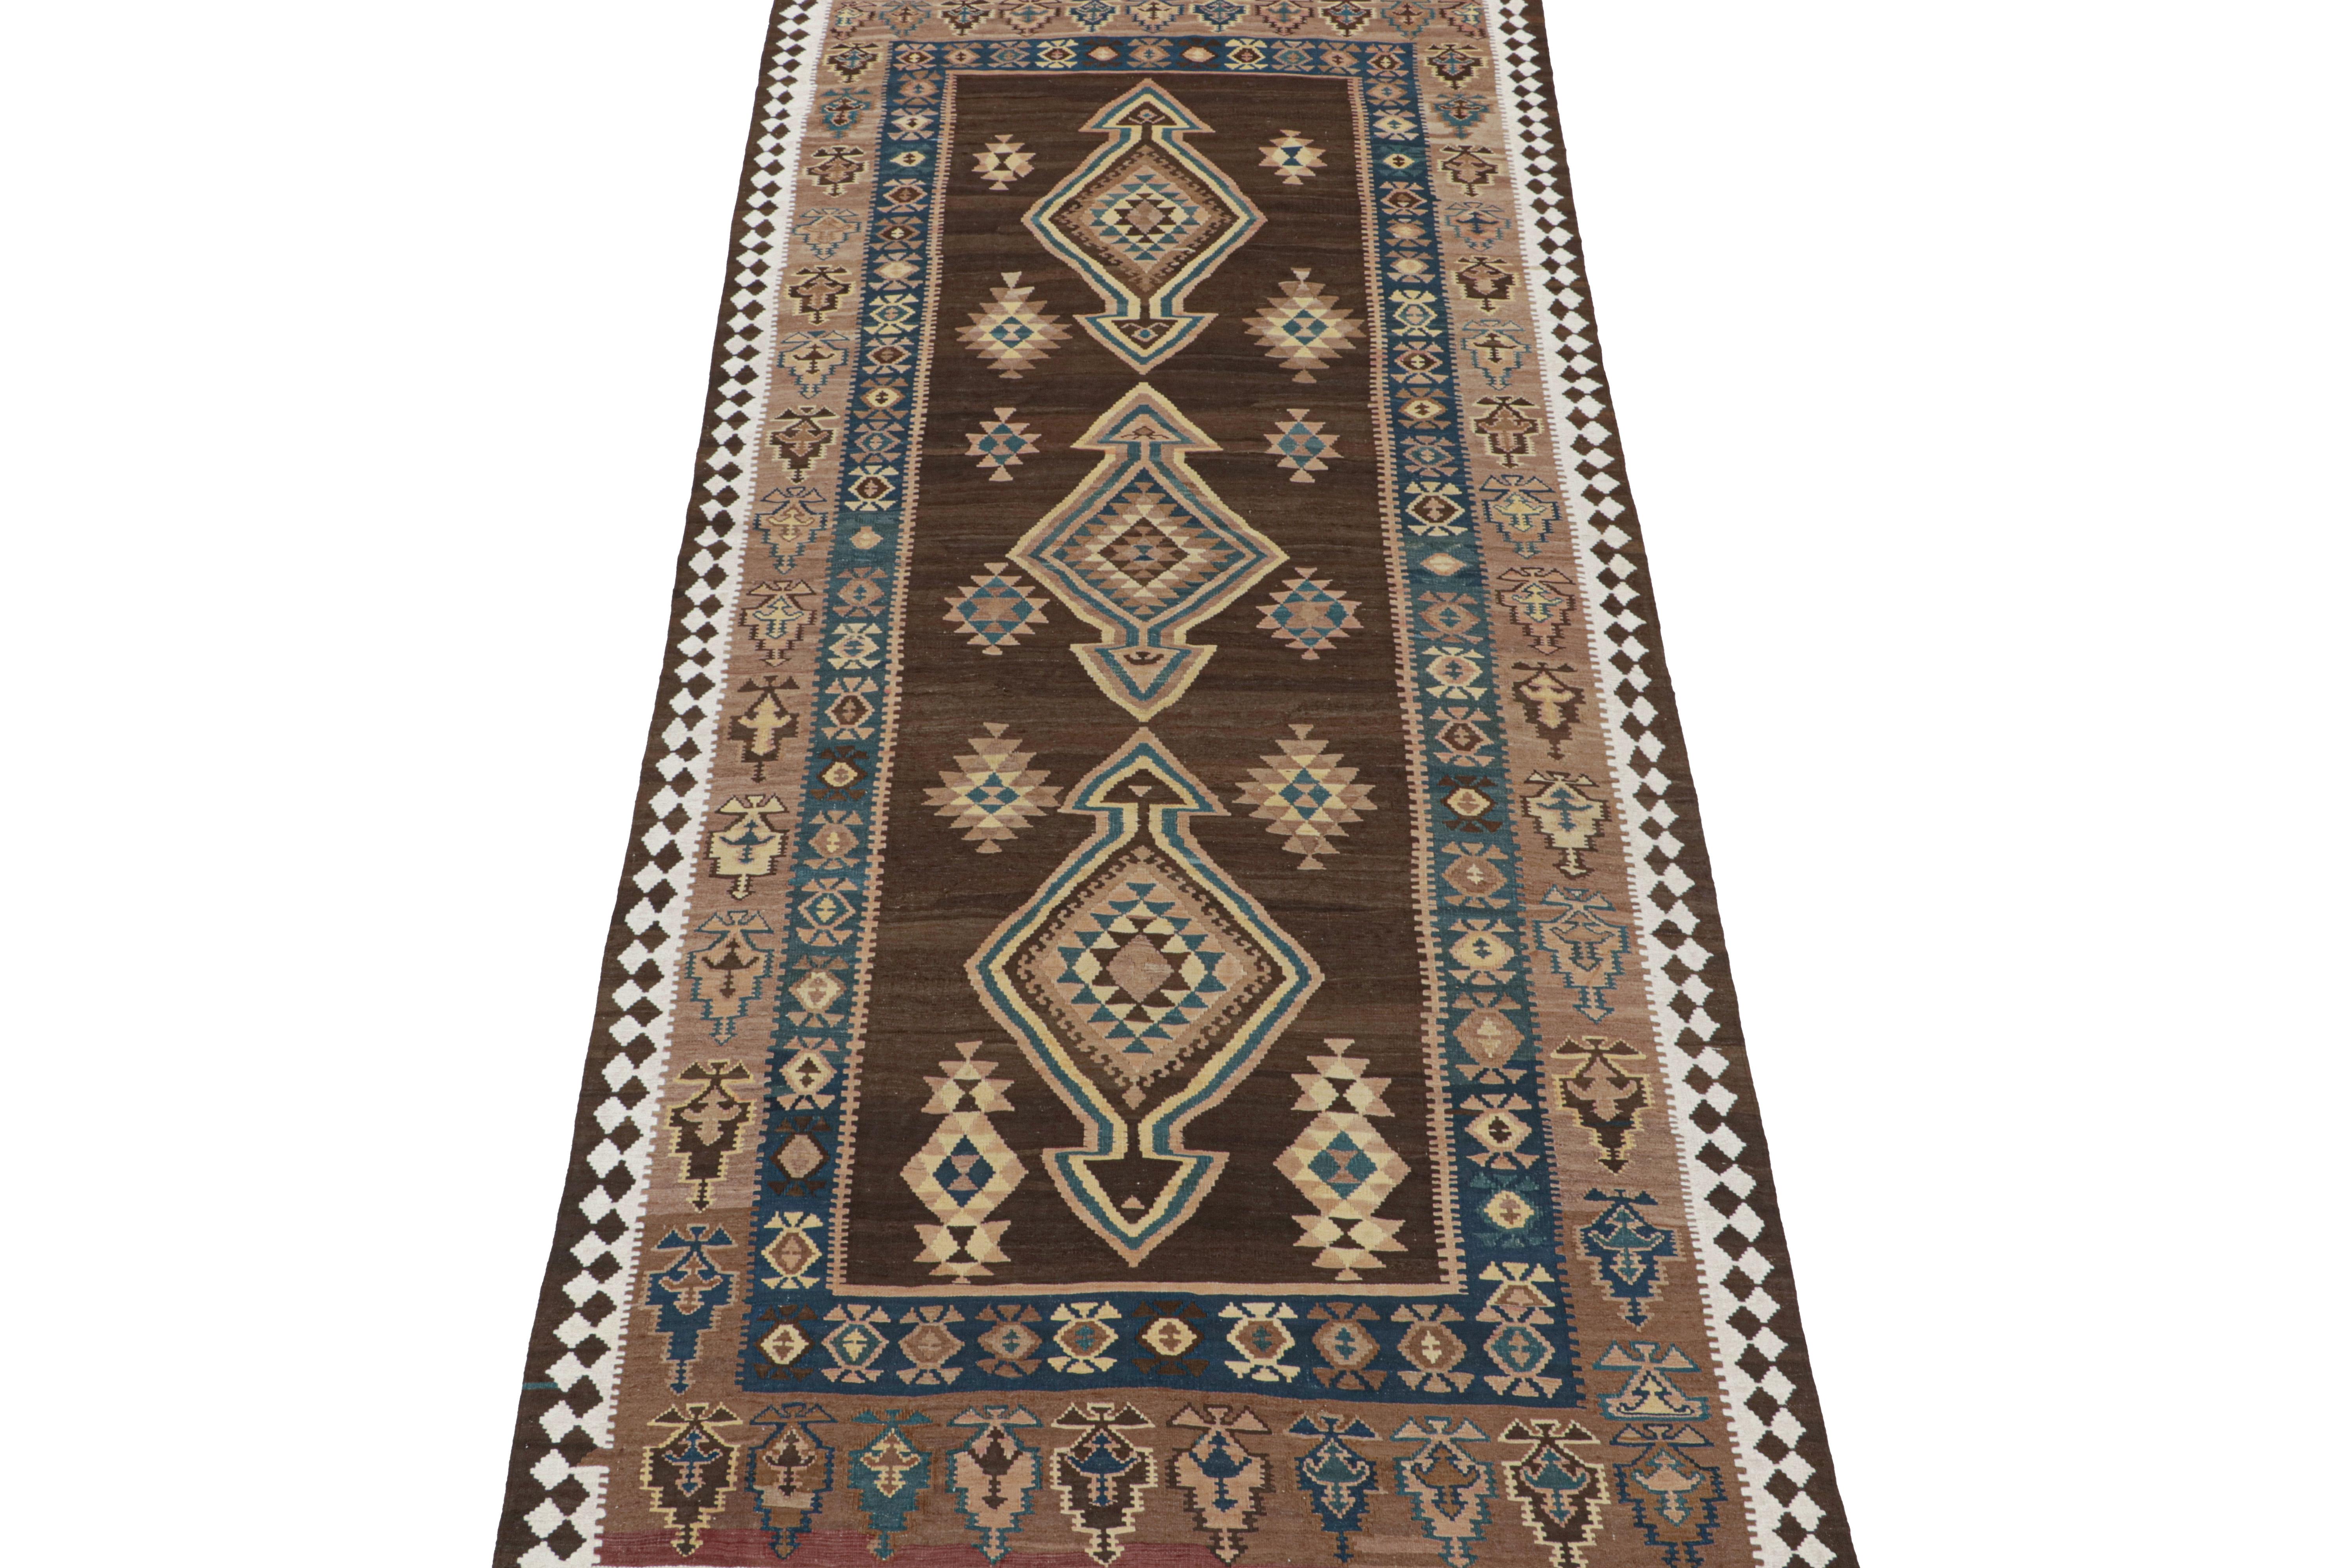 This vintage 5x13 Persian Kilim is believed to be a tribal rug of the 1950s. 

Handwoven in wool, its design enjoys medallions and geometric motifs in rich brown, beige, and blue tones. Connoisseurs will note the white fencepost-style border, and